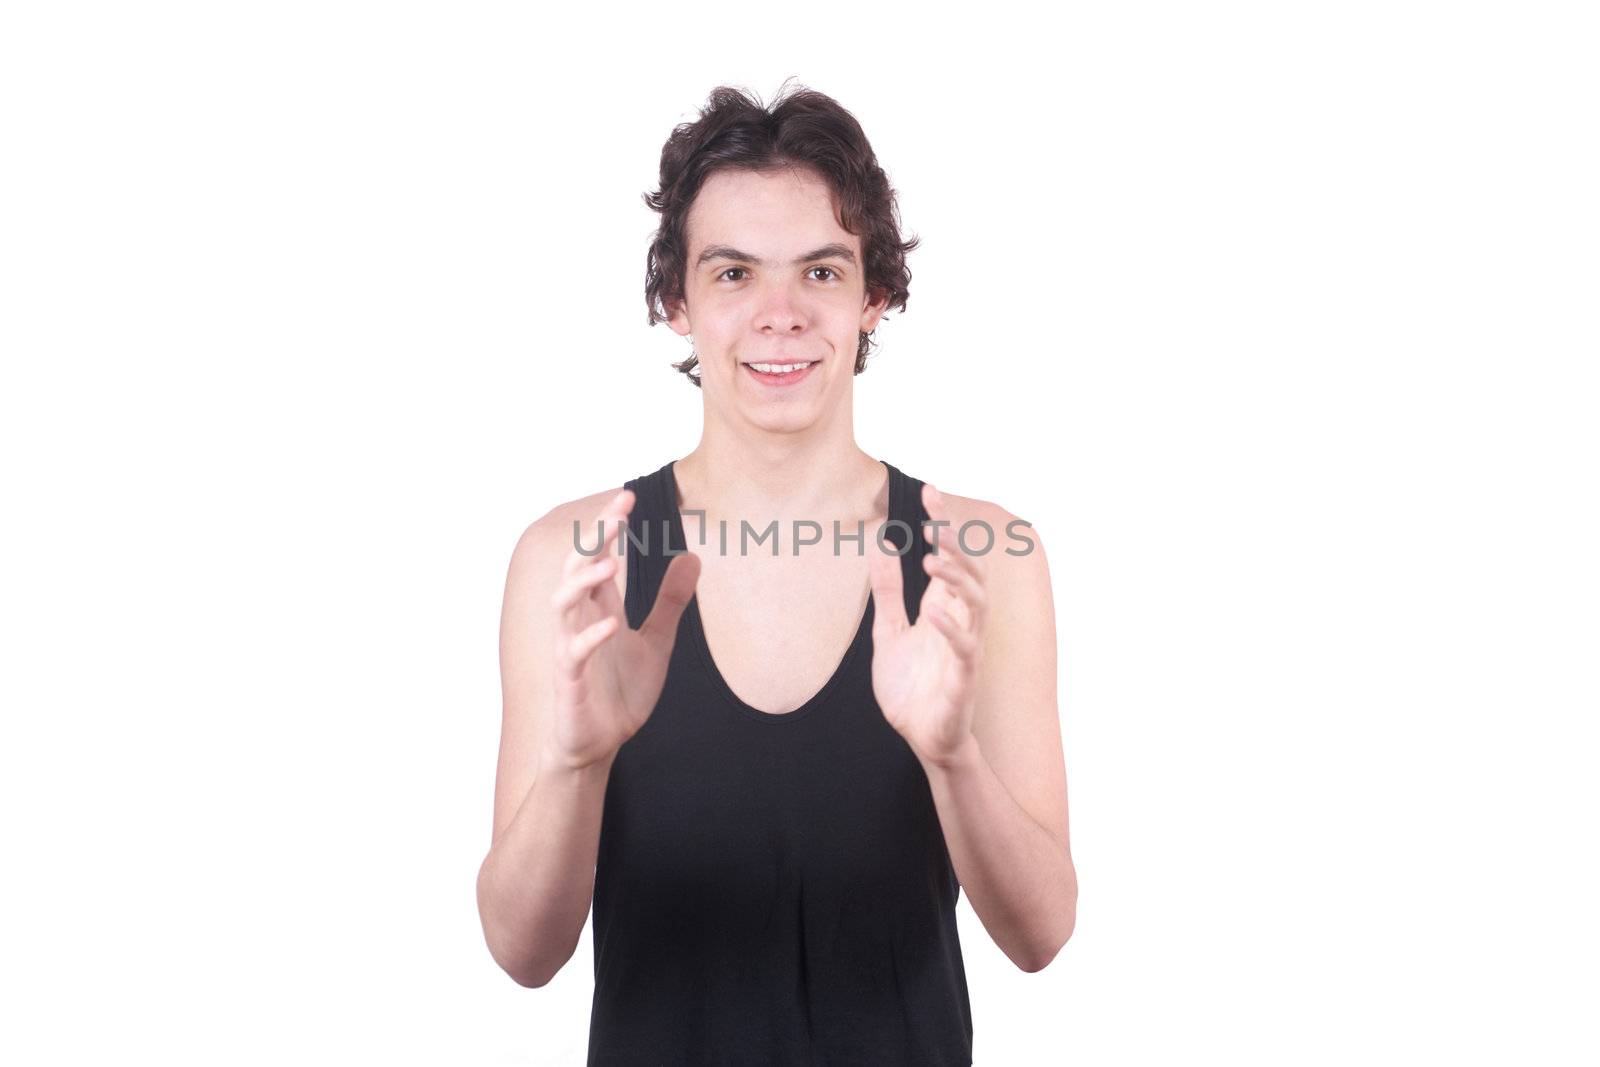 The boy holds something on a white background